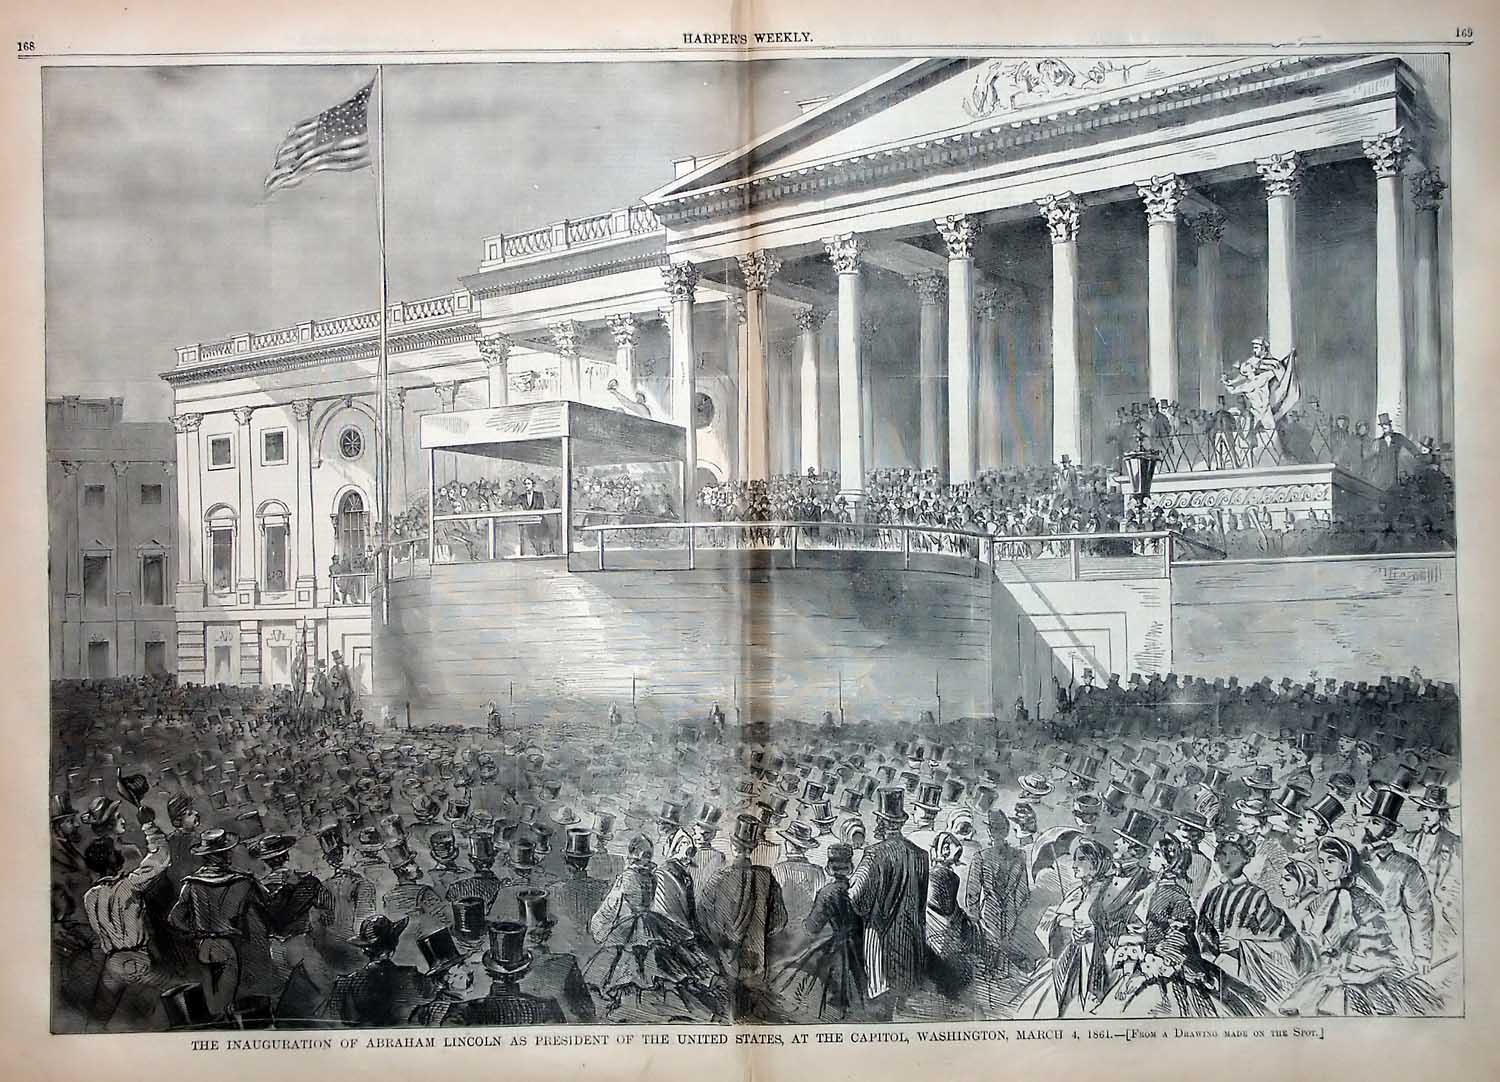 The Inauguration of Abraham Lincoln as President of The United States of America, at the Capitol, Washington, March 4, 1861